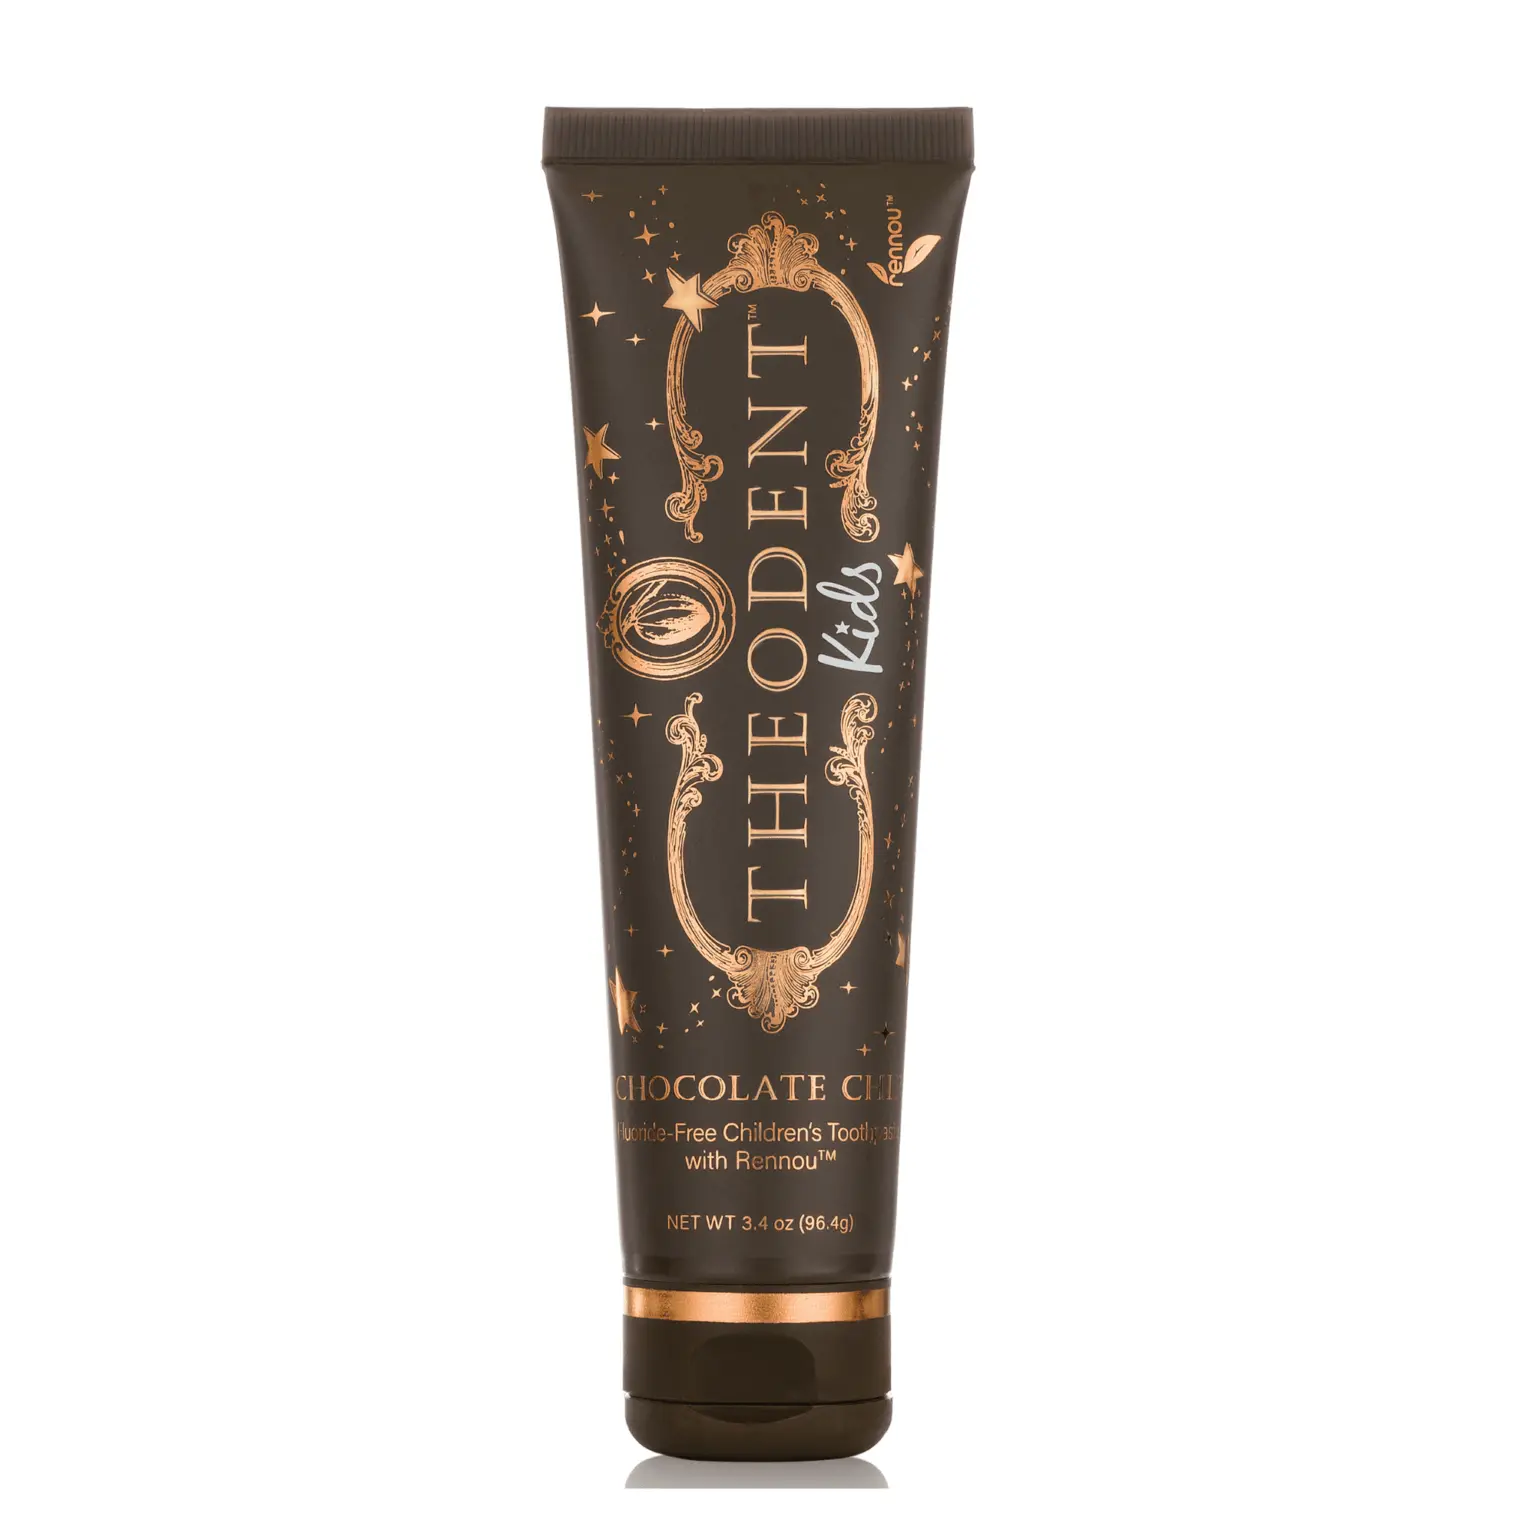 Theodent Chocolate Chip Kids Toothpaste